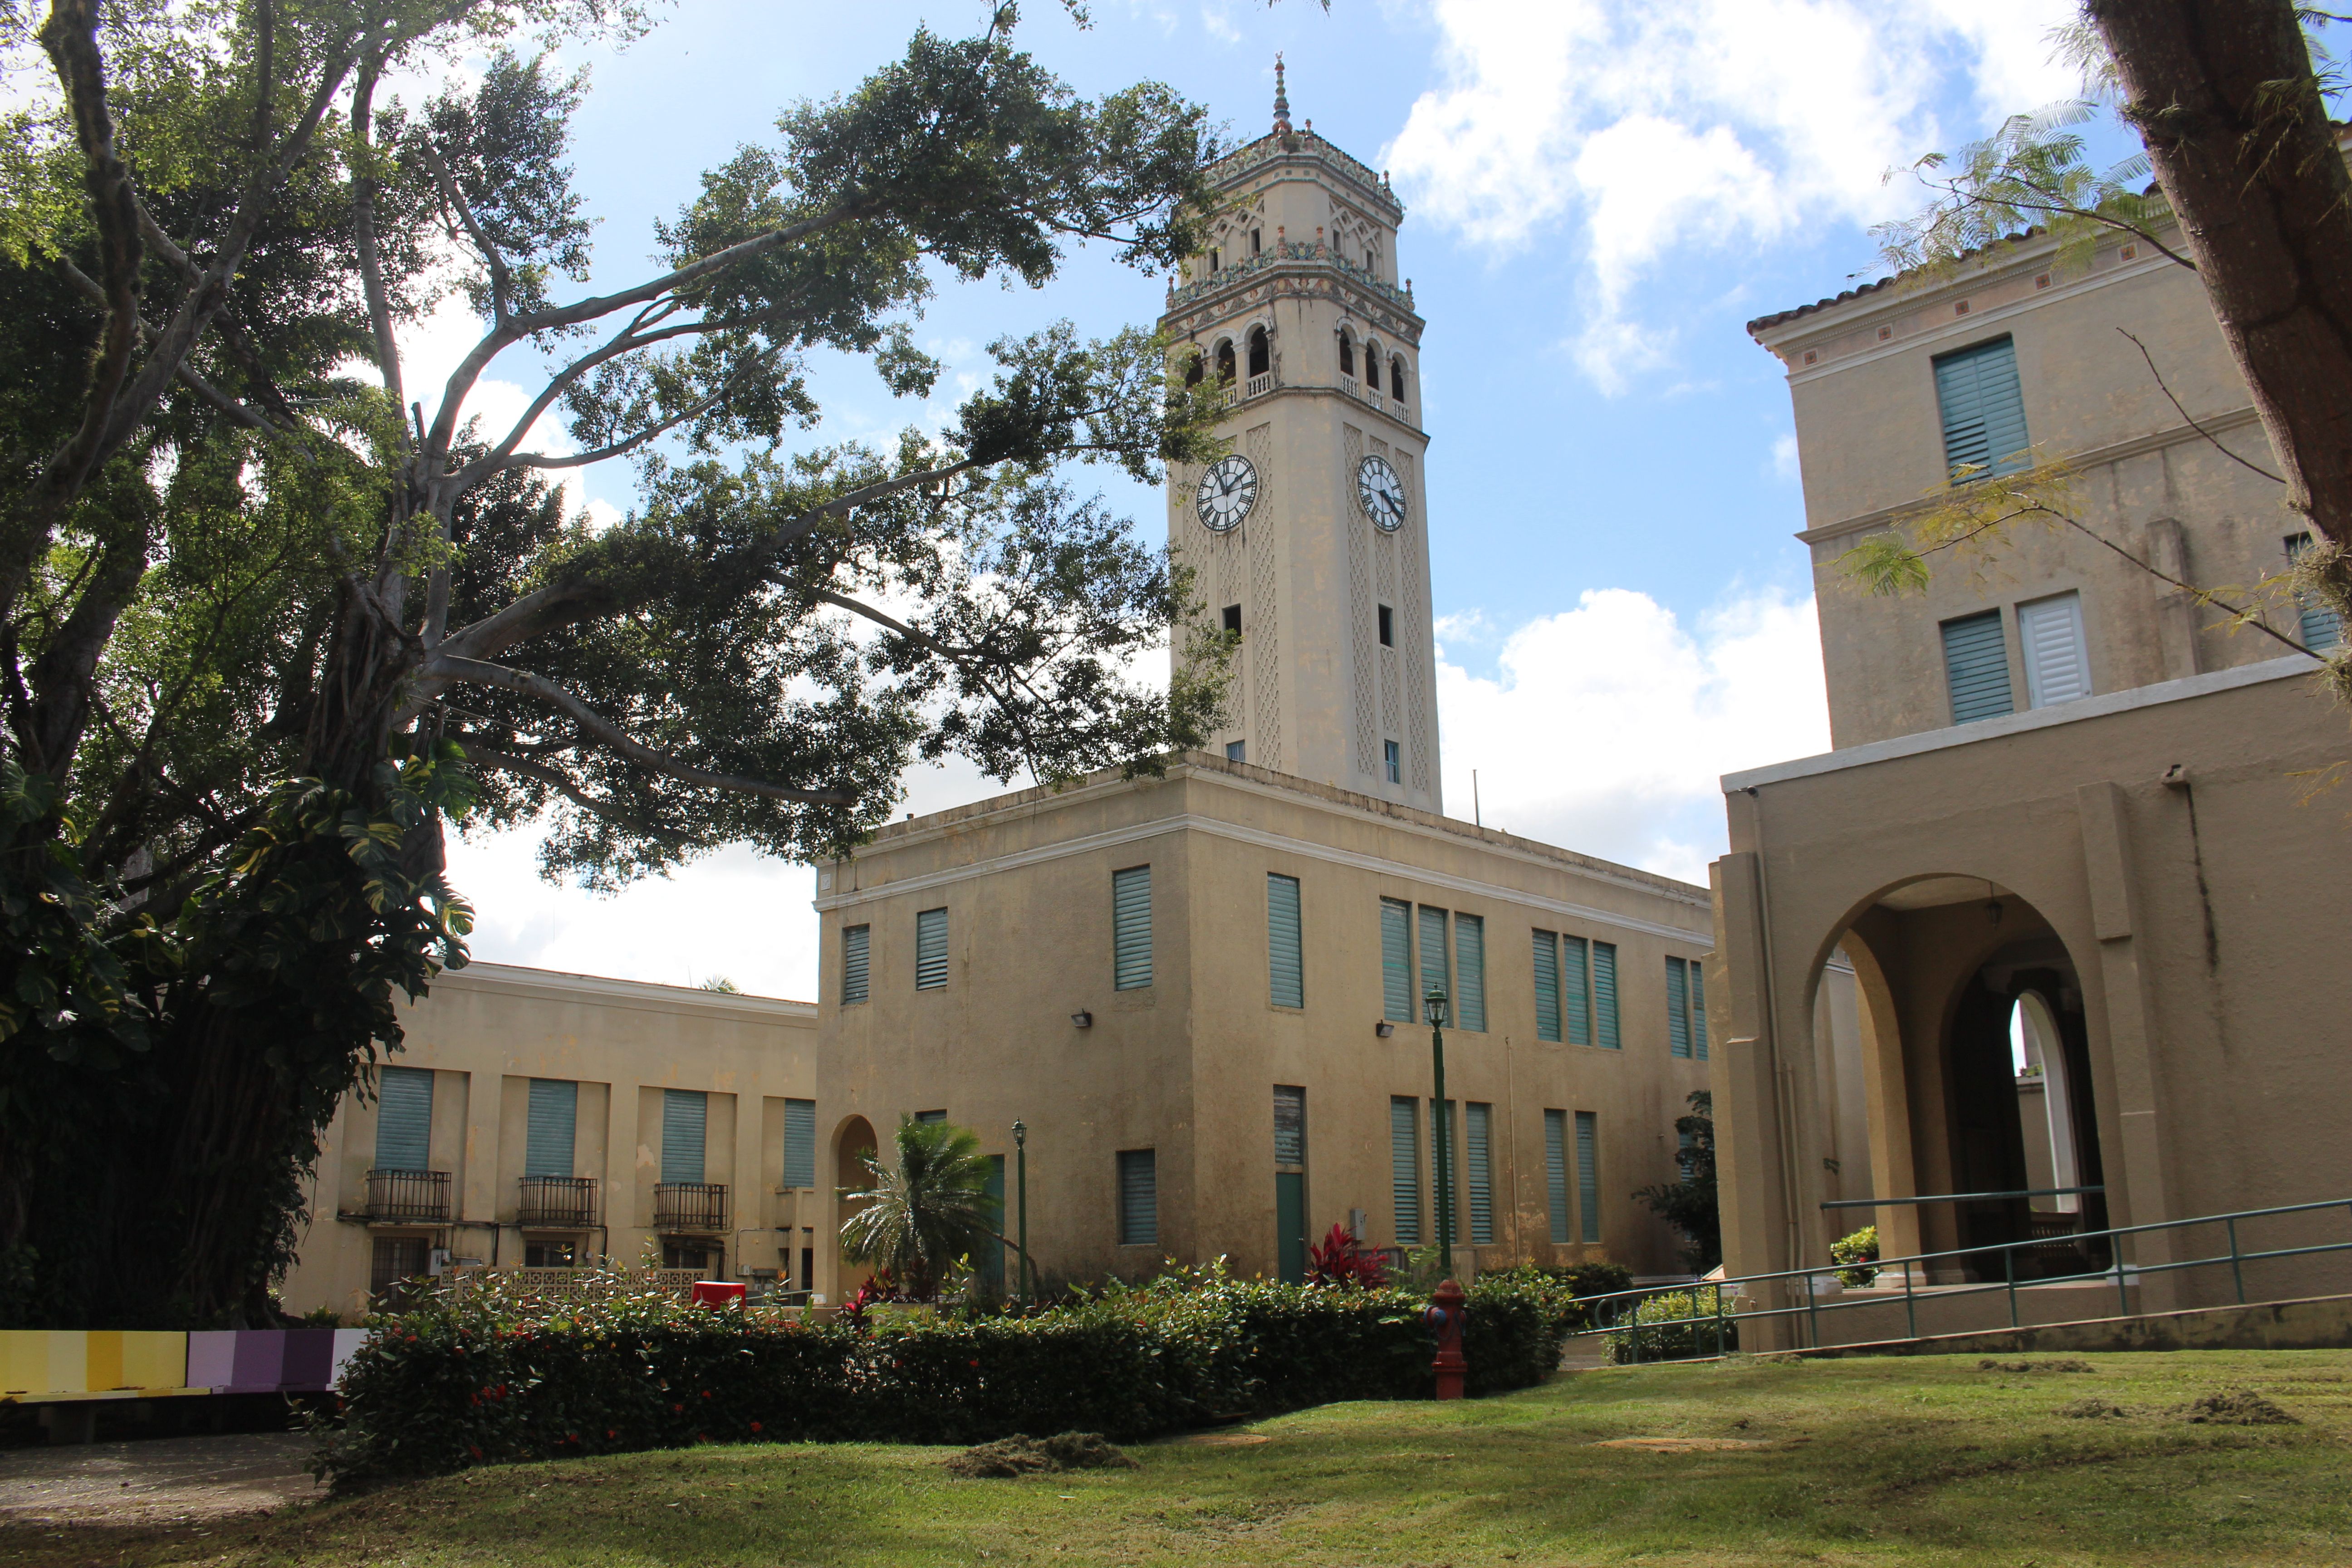 Another view of the clock tower standing over a fairly empty University of Puerto Rico Río Piedras Campus after the January 2020 earthquake struck the island. Image by Carmen Honker. United States, 2020.